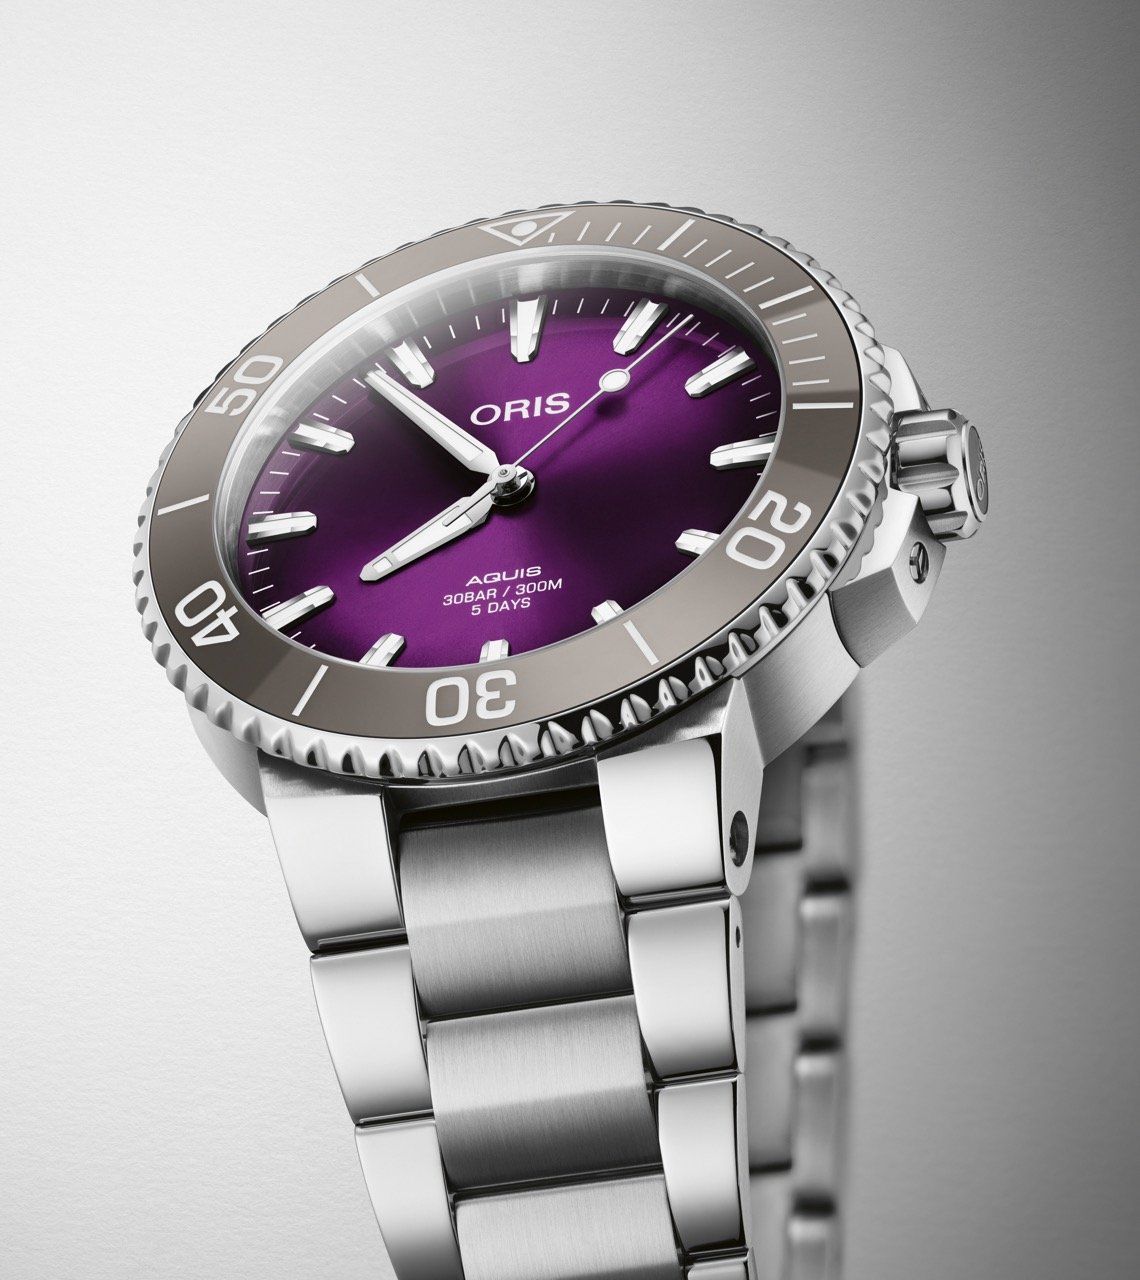 Powered by the Caliber 400, the watch offers water resistance of up to 300 meters